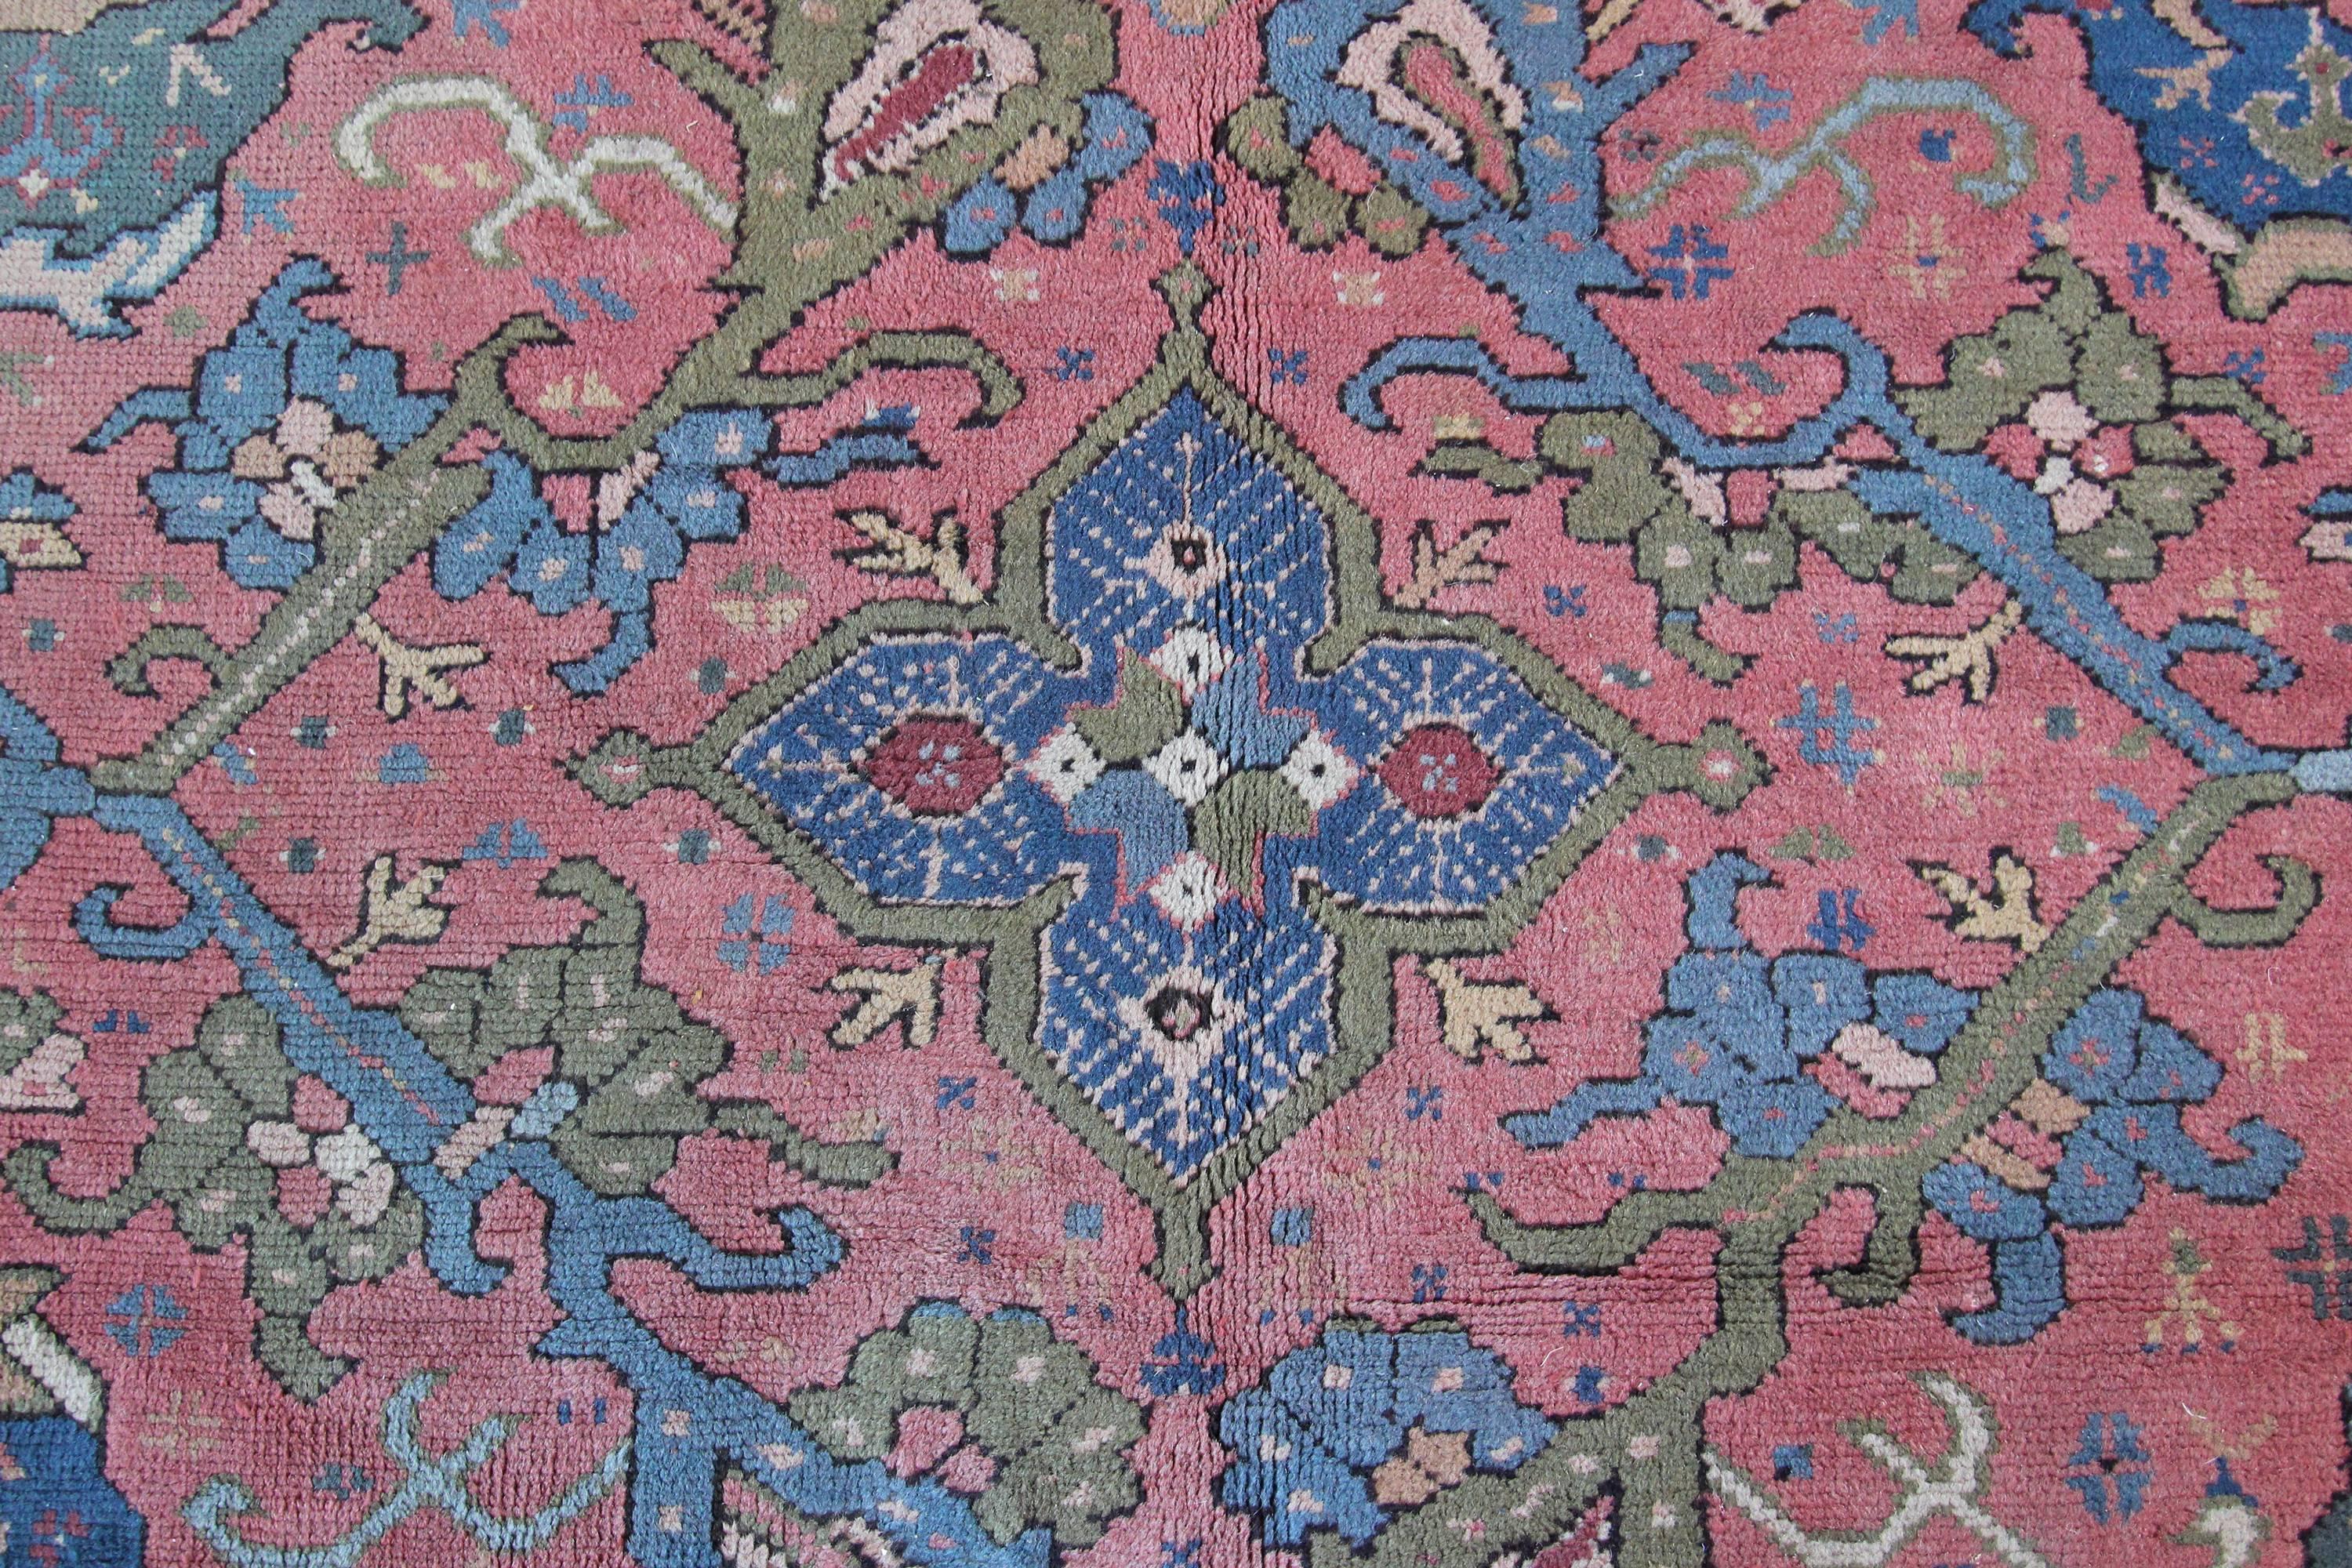 A very decorative antique Oushak carpet from Western Anatolia which was one of the largest rug production areas since the Ottoman Empire. Beautiful soft colours on this piece, soft pinks, greens and pale blues. Often younger Ushaks or Oushak rugs